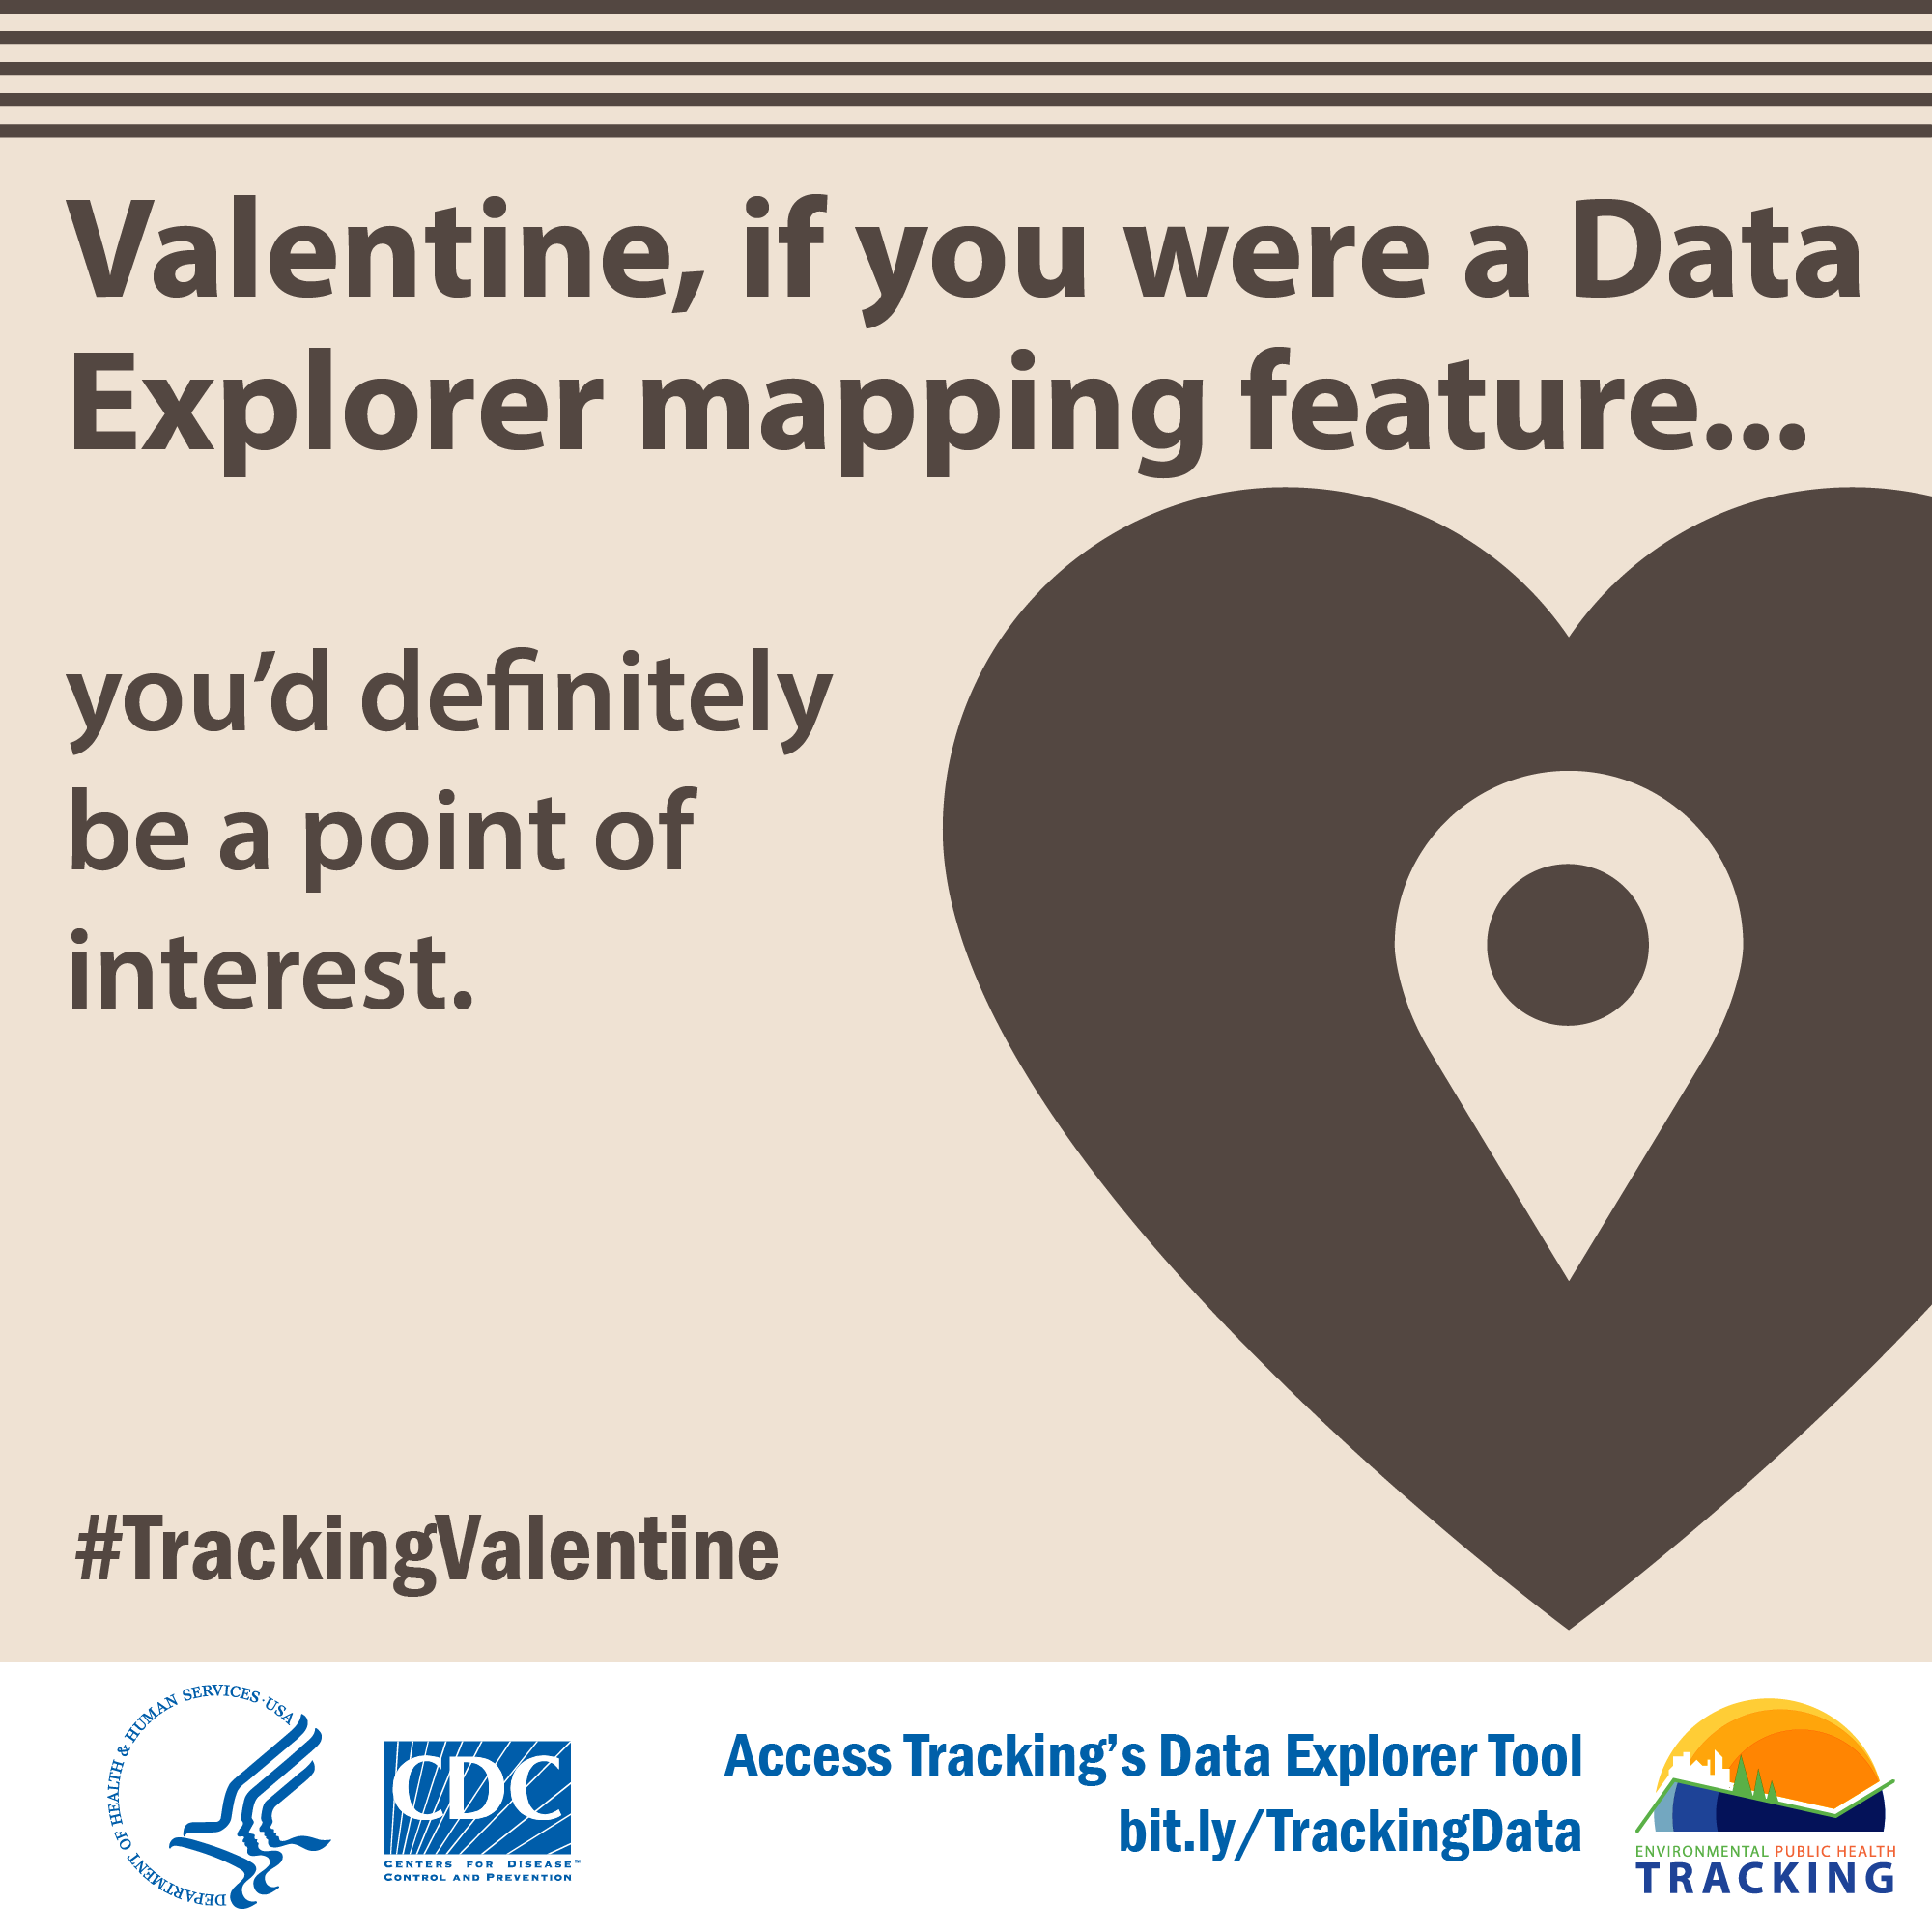 map pin icon inside decorative brown heart with text: "Valentine, if you were a Data Explorer mapping feature...you'd definitely be a point of interest! #TrackingValentine"